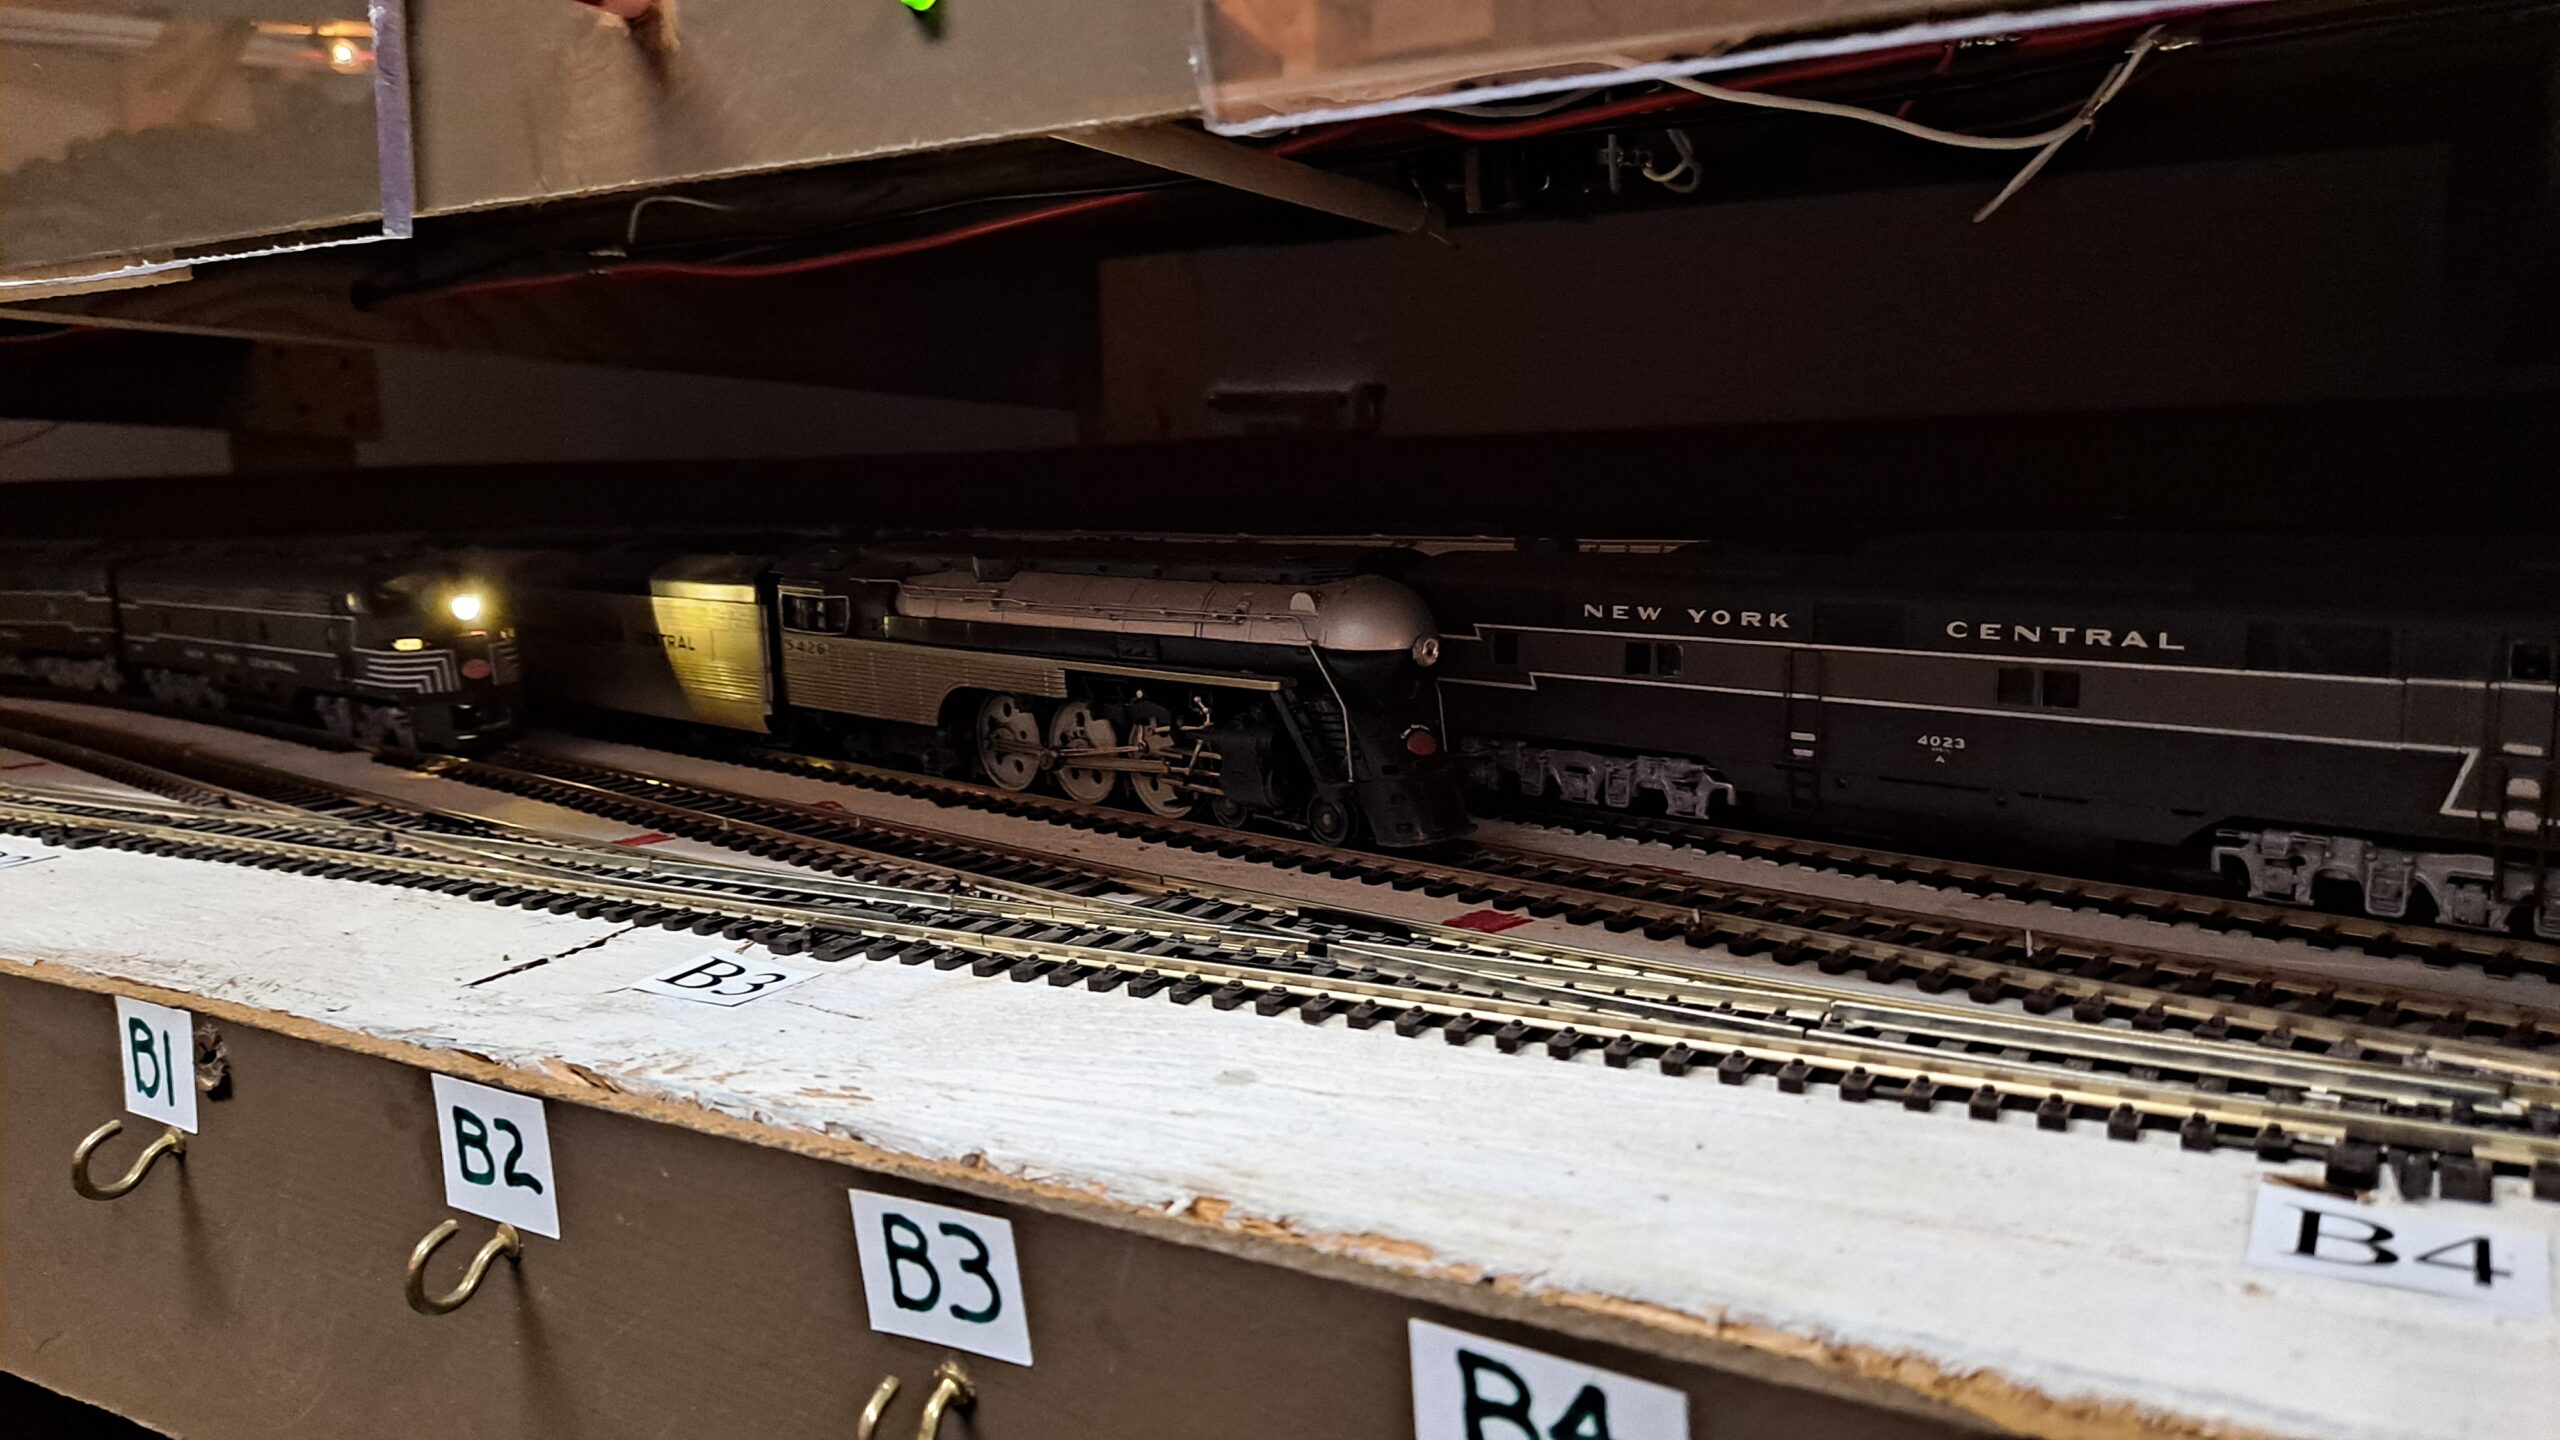 New York Central HO scale trains are lined up in staging.